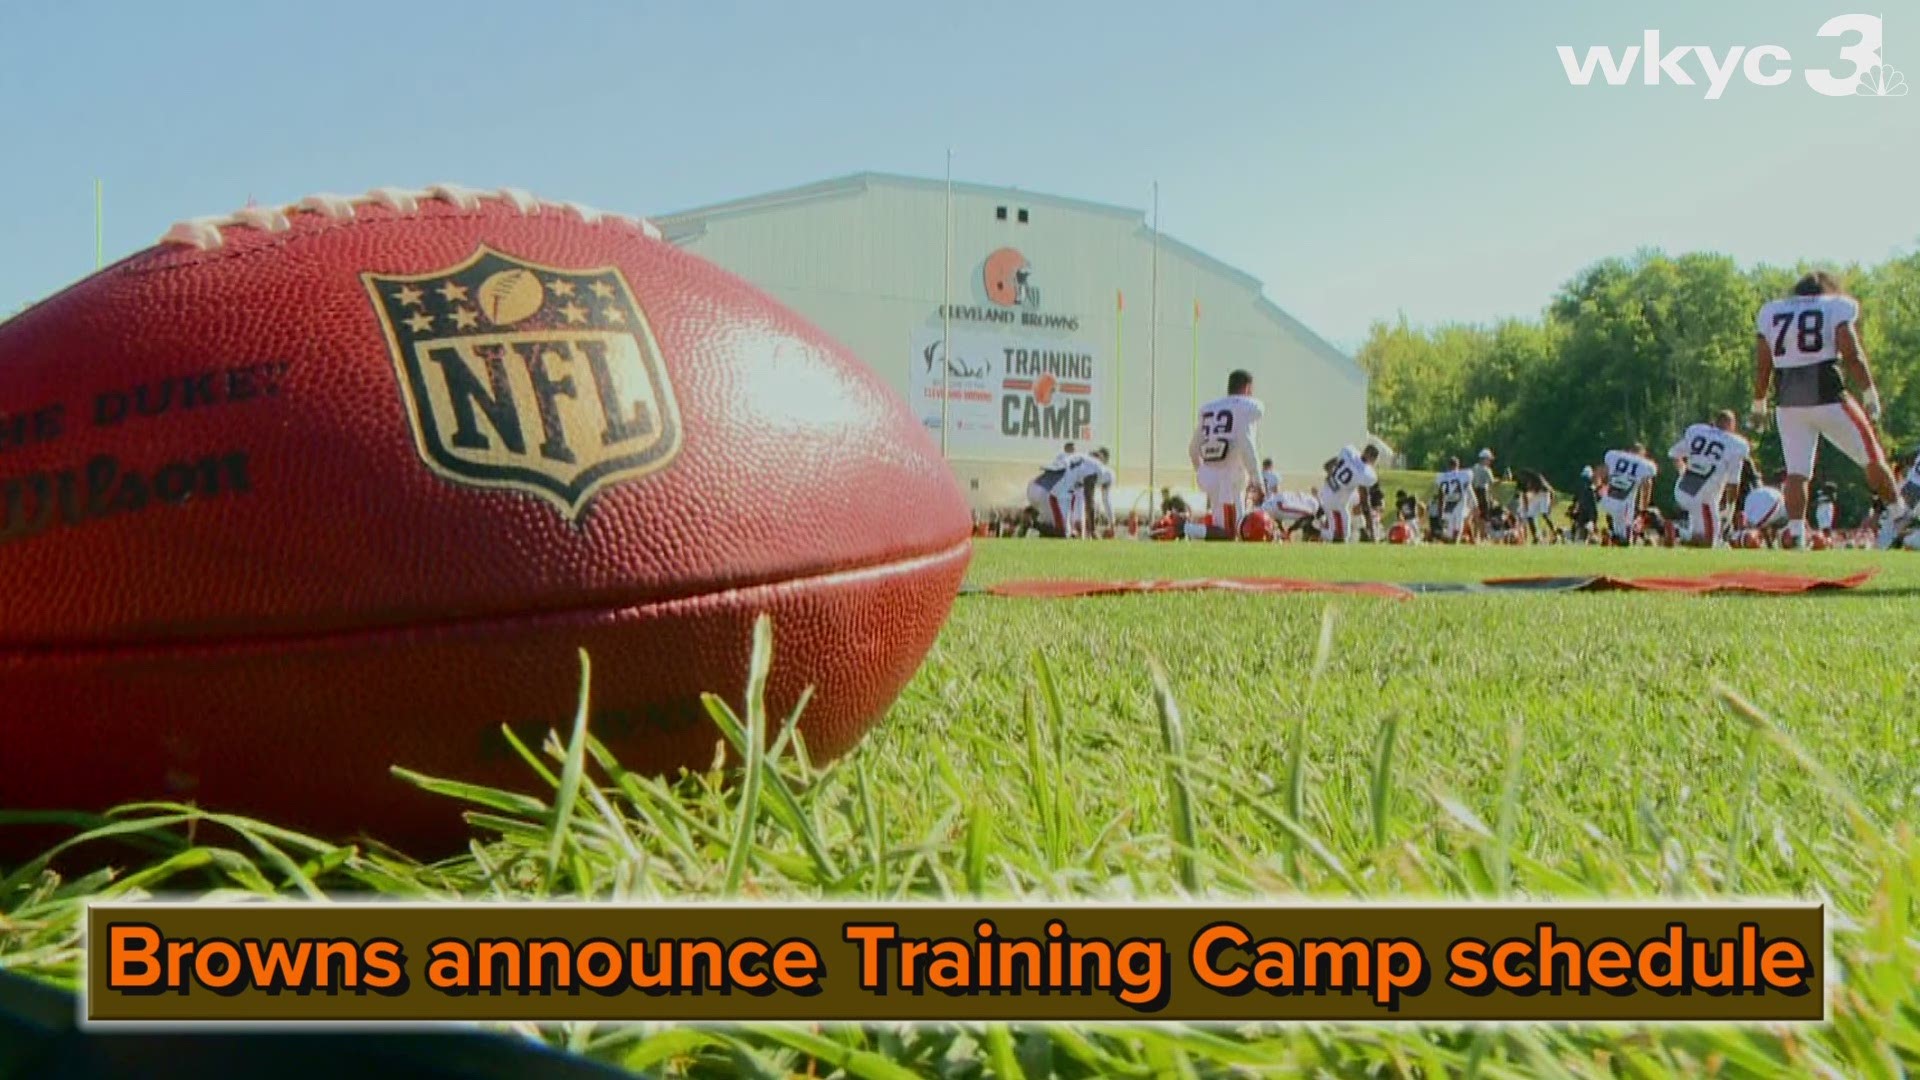 On Thursday, the Cleveland Browns announced their schedule for training camp ahead of the 2019 season.